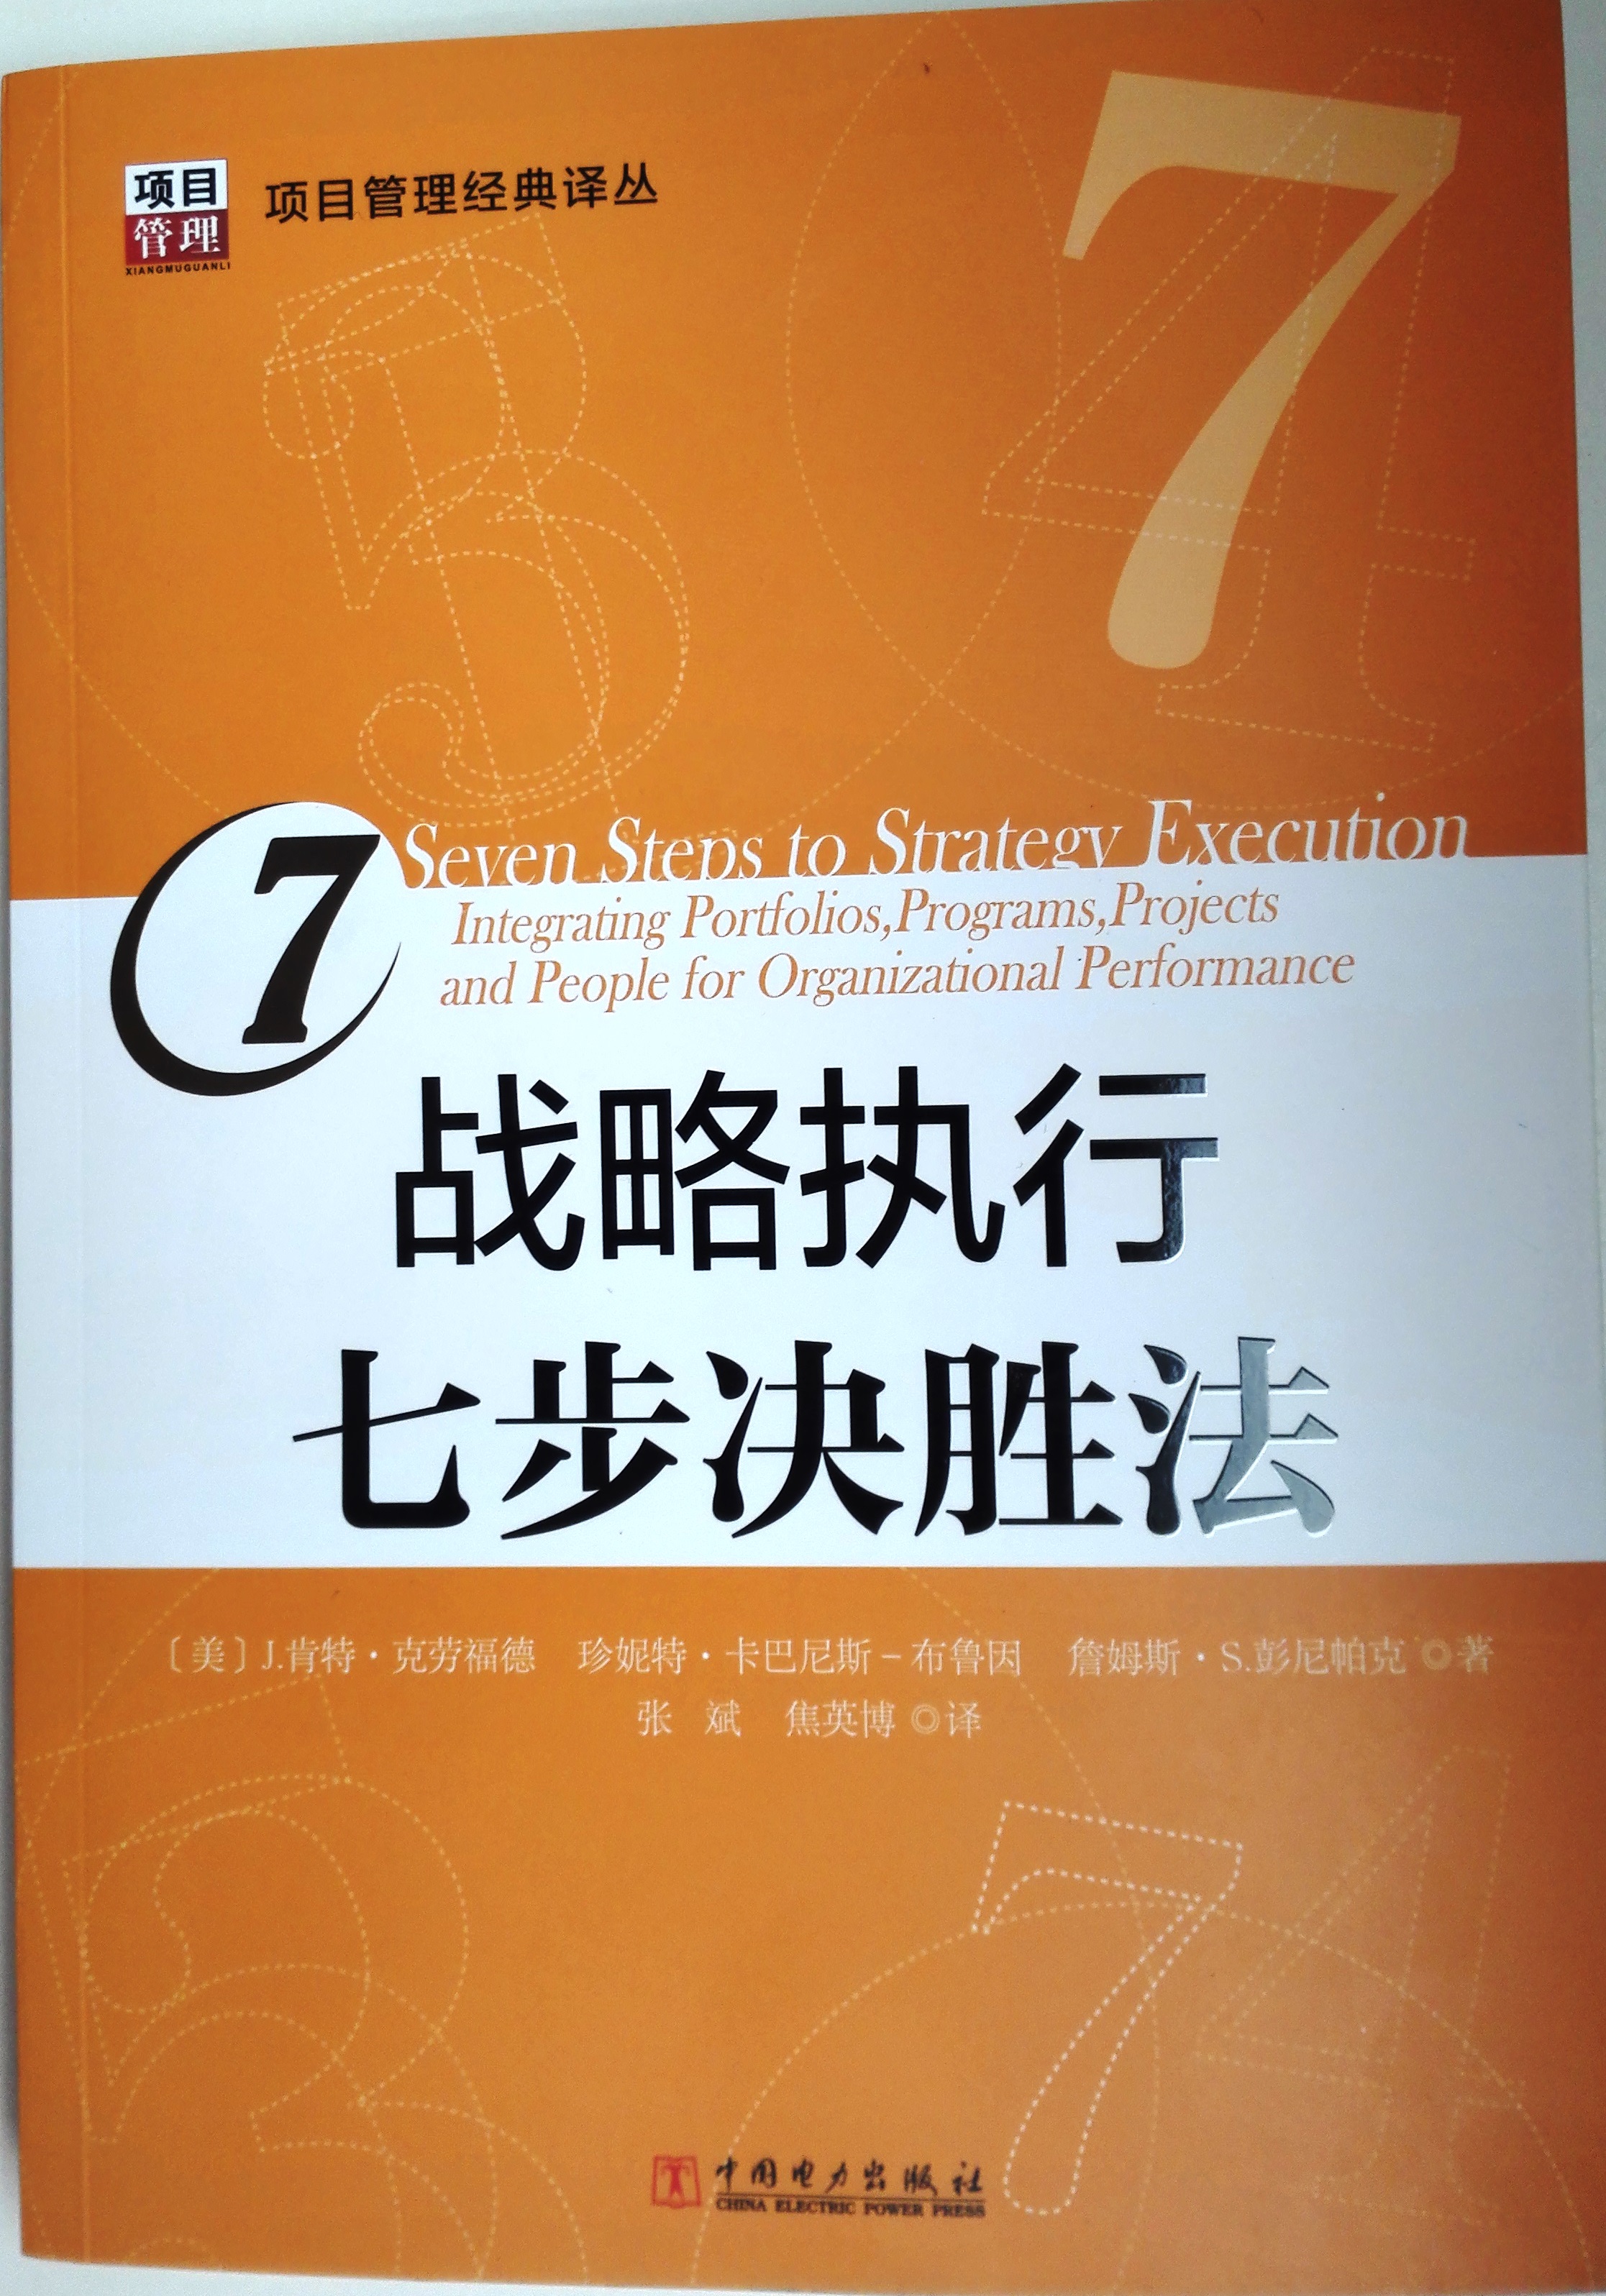 Seven Steps to Strategy Execution - by J. Kent Crawford - Chinese Mandarin Translation